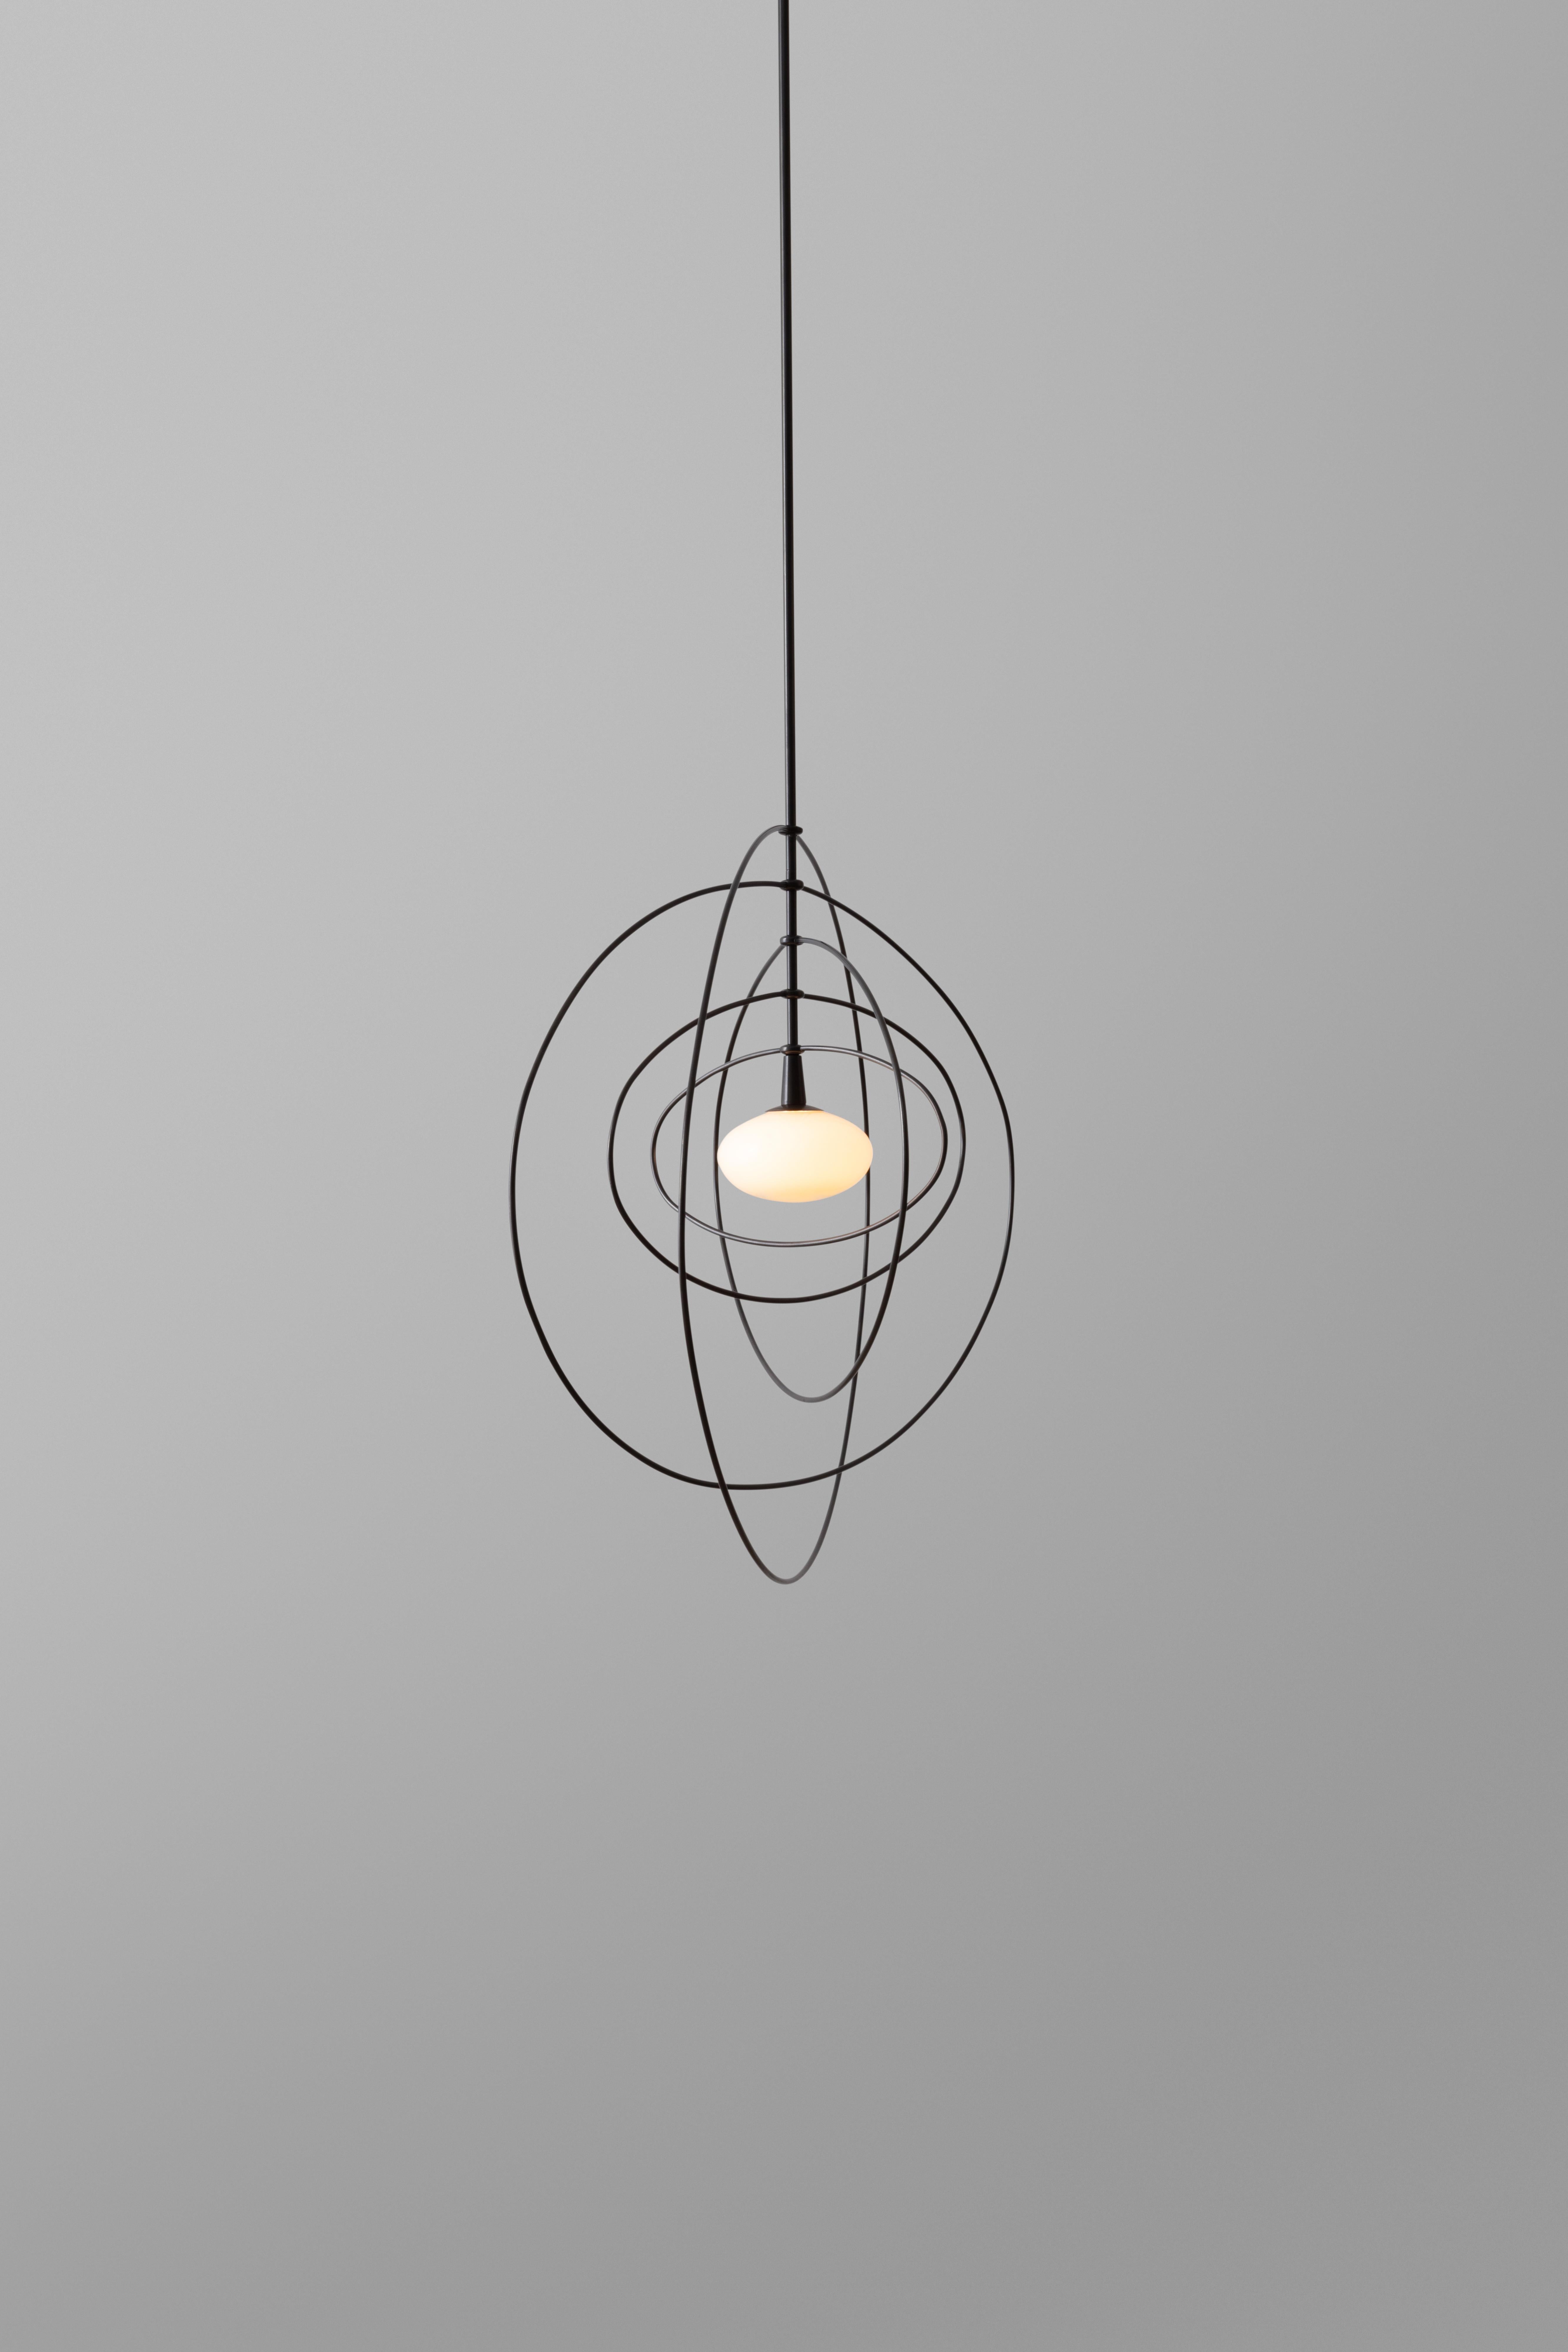 Ellipse Mobile Pendant LED Kinetic Sculpture with Blown Glass and Brass Rings In New Condition For Sale In Brooklyn, NY